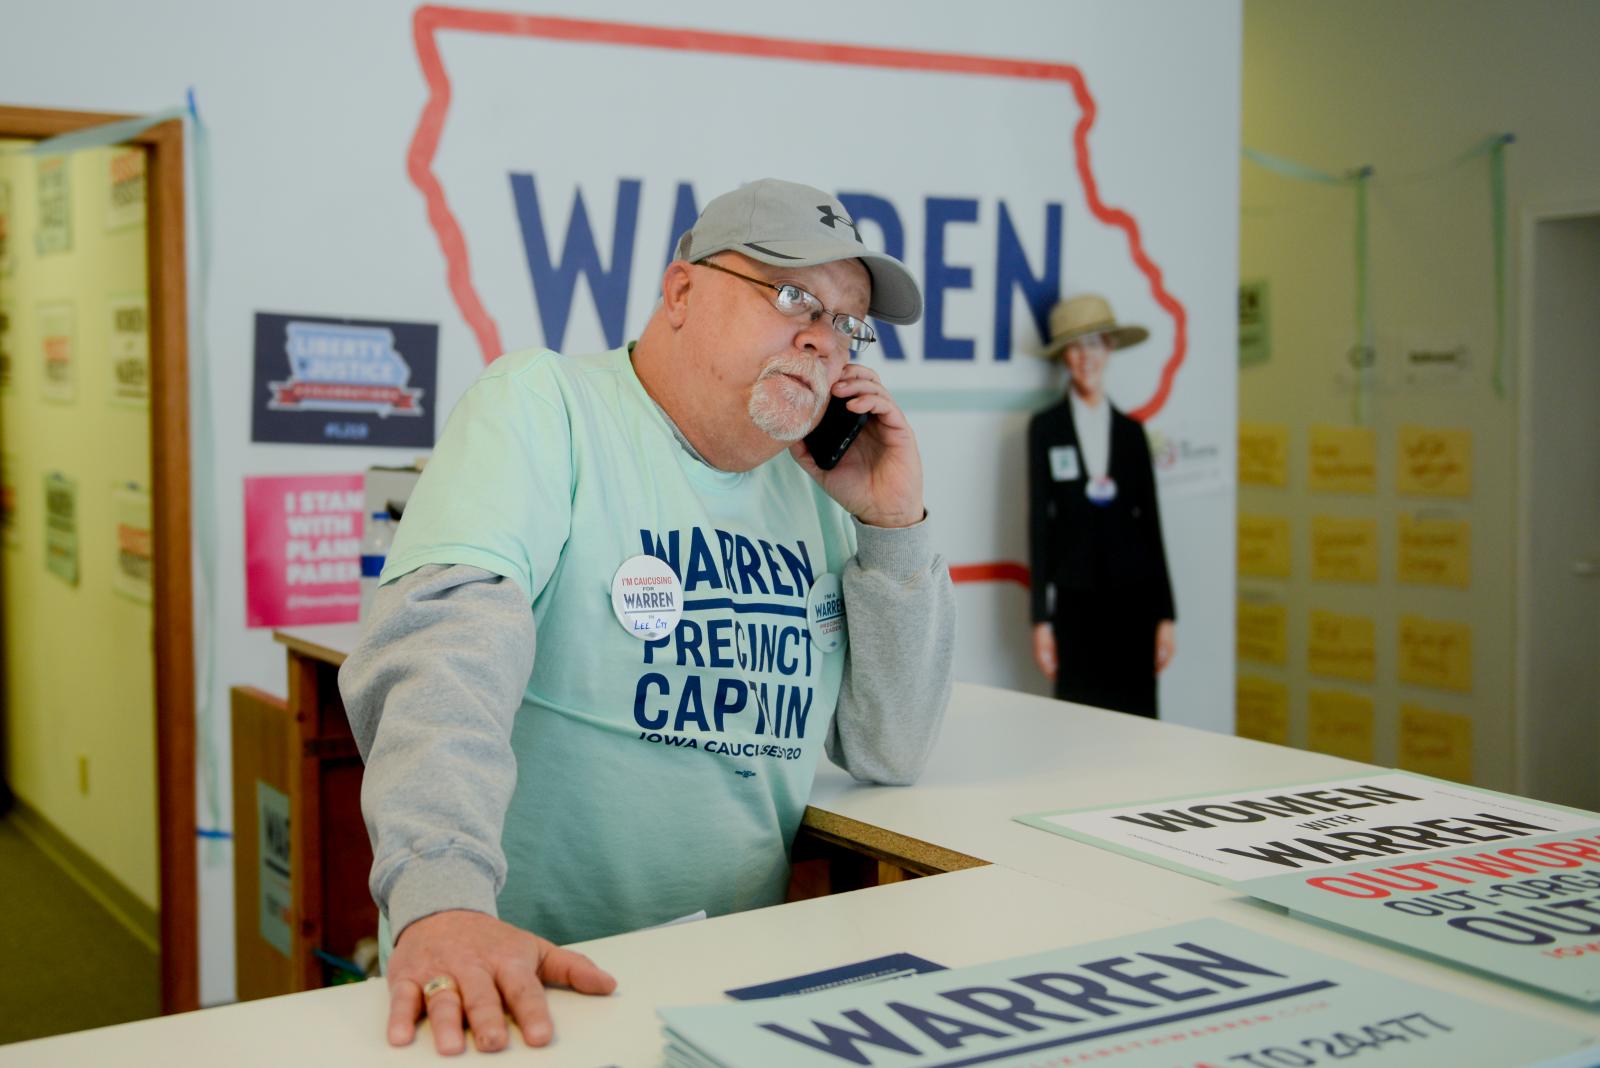 Joel Amandus of Fort Madison an... he was campaigning for Warren.